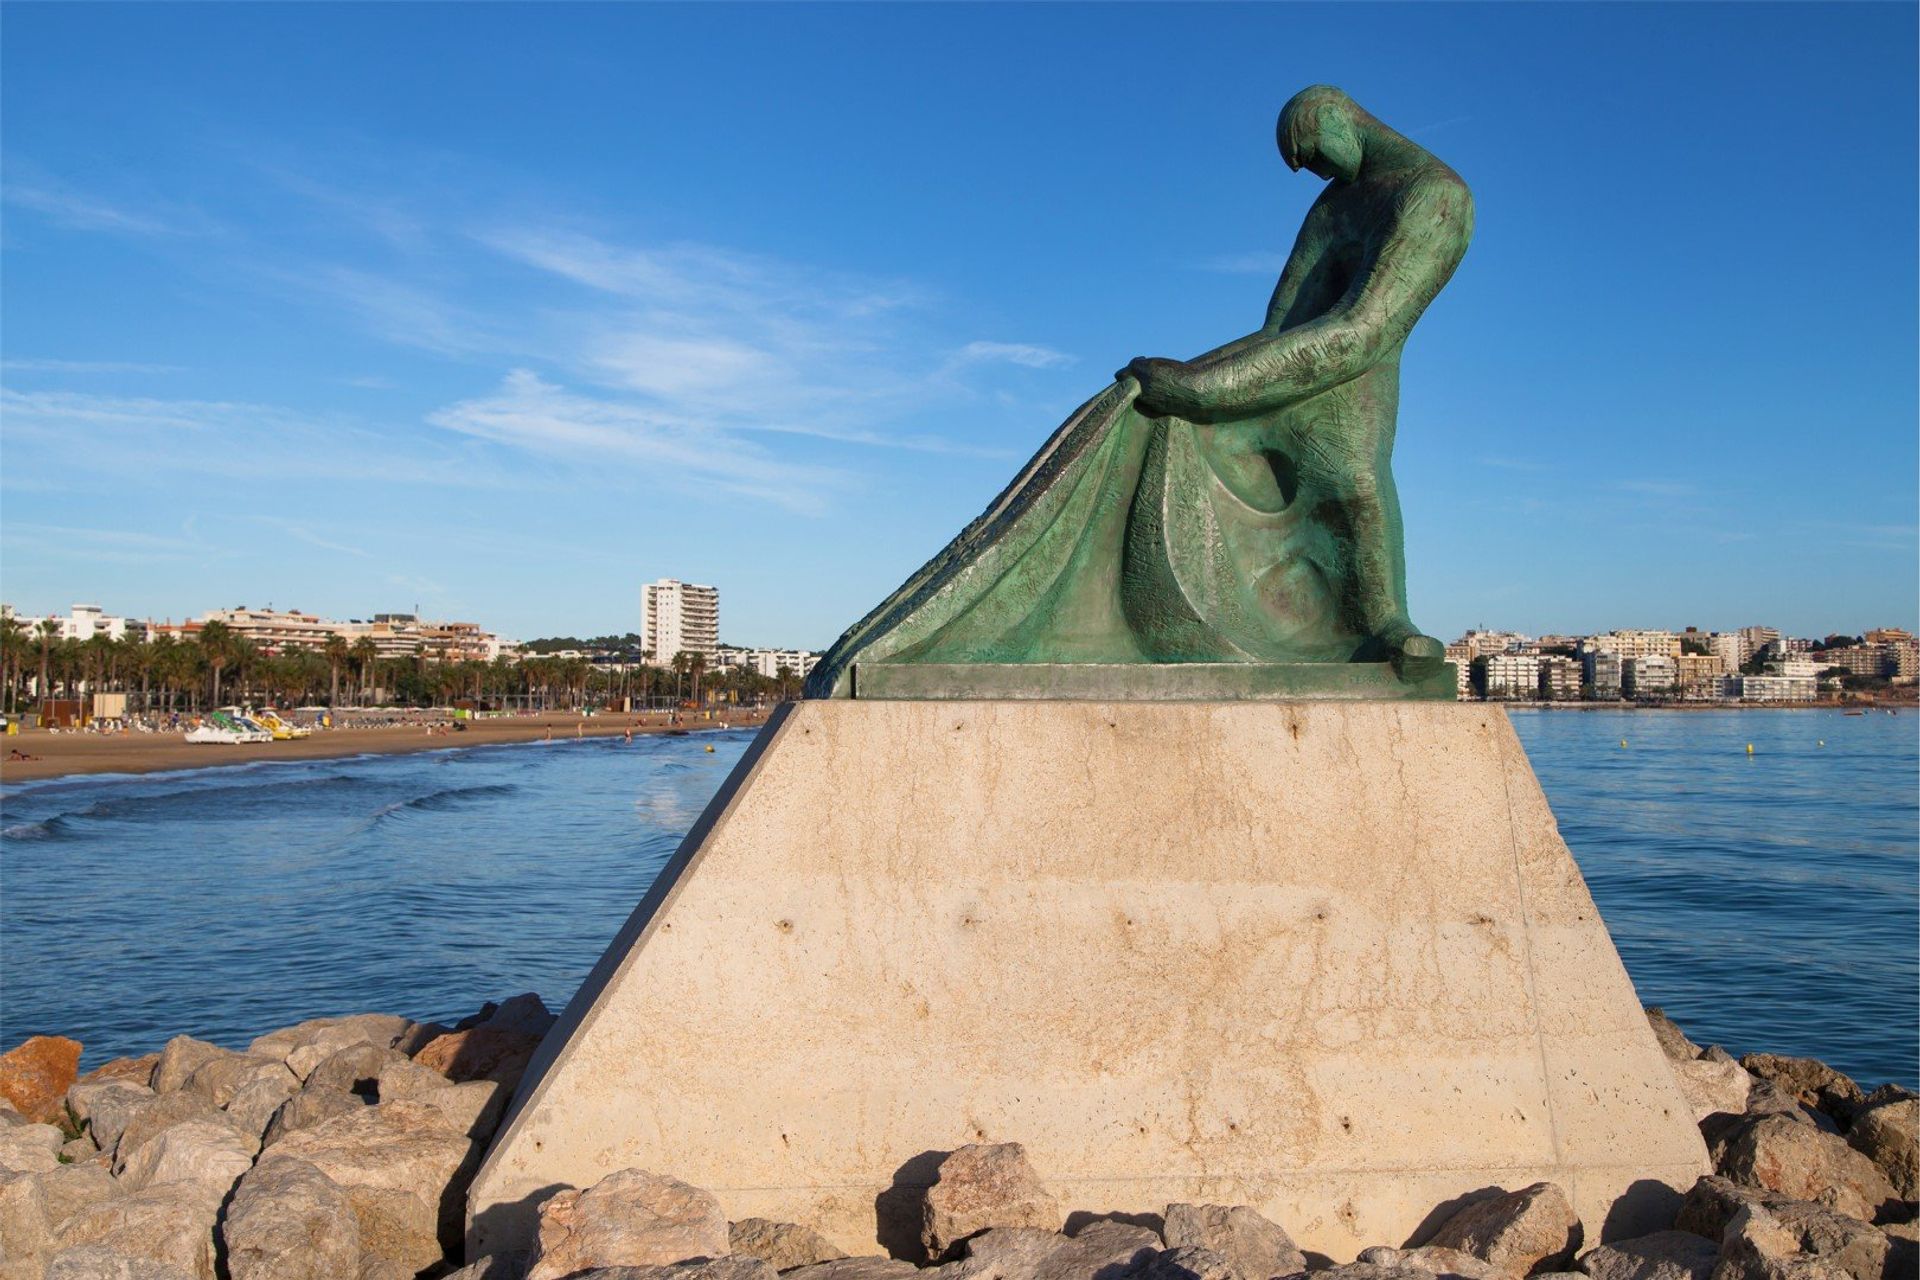 Fisherman's memorial, designed in 1990 by Ramon Ferran, located on the pier between the the beach, the sea and the marina